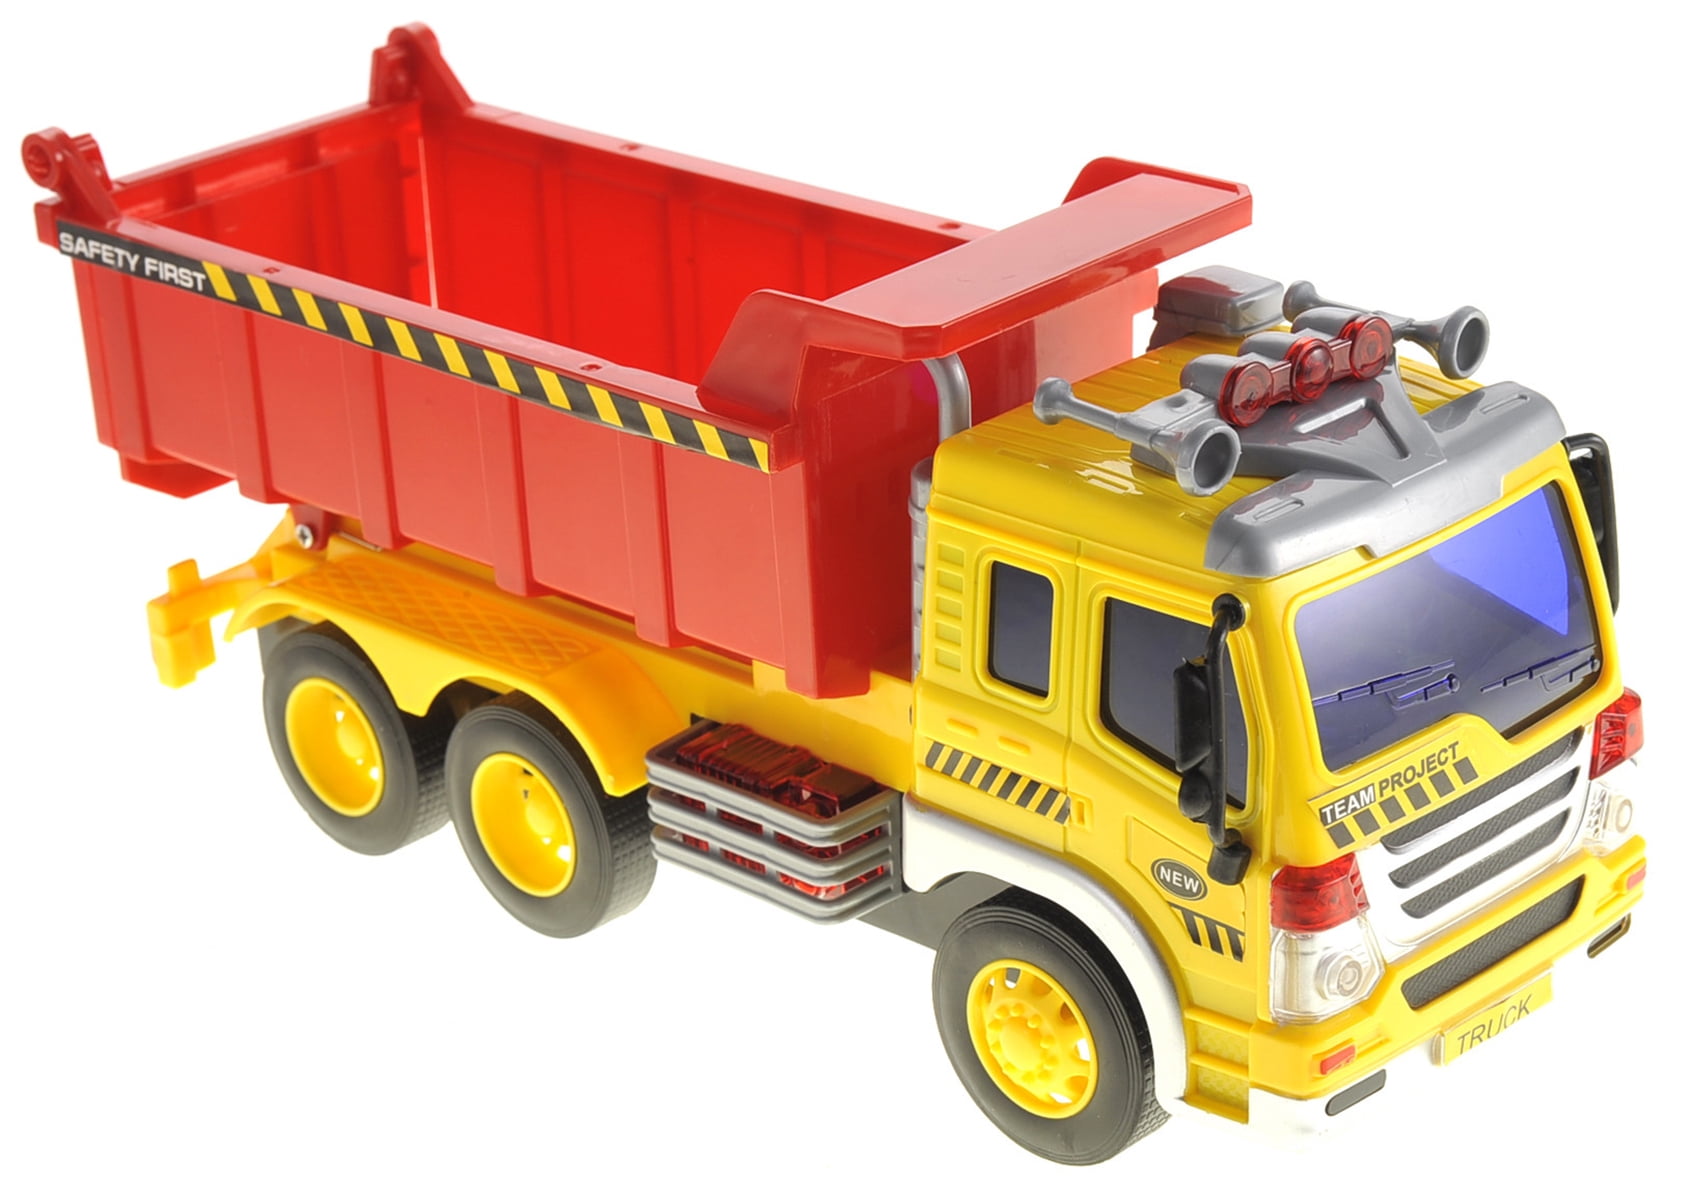 Details about   RC DUMP TRUCK Toy Gift Engineering Truck Model Construction Vehicle Light Sound 